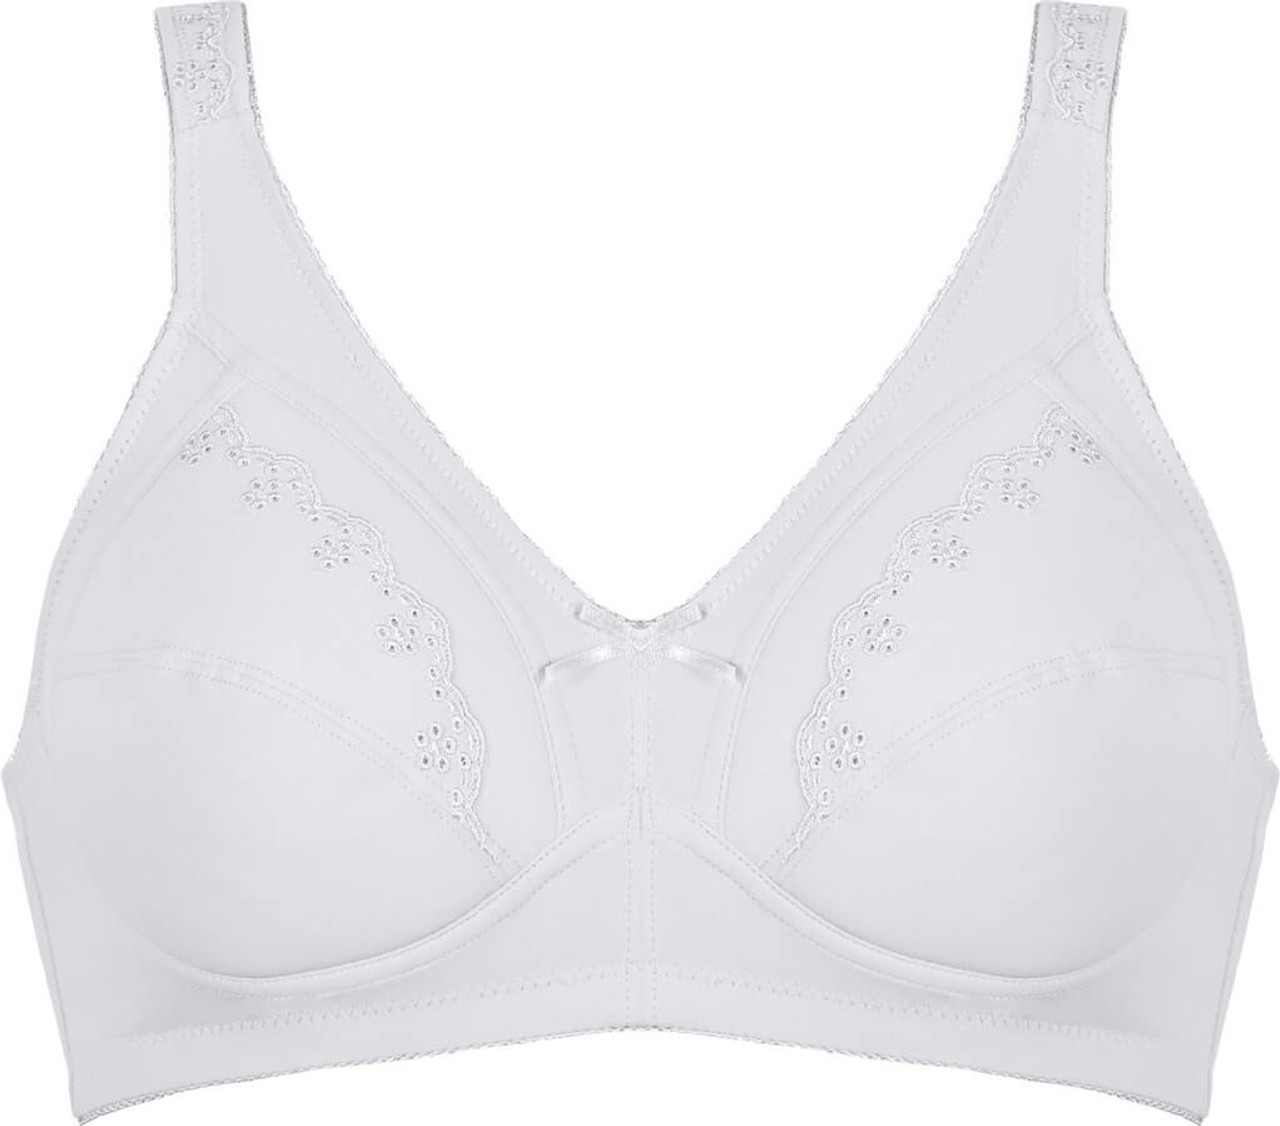 Naturana Wireless Moulded Bra With Cotton & Comfort Staps (A–D 36–46) 86020